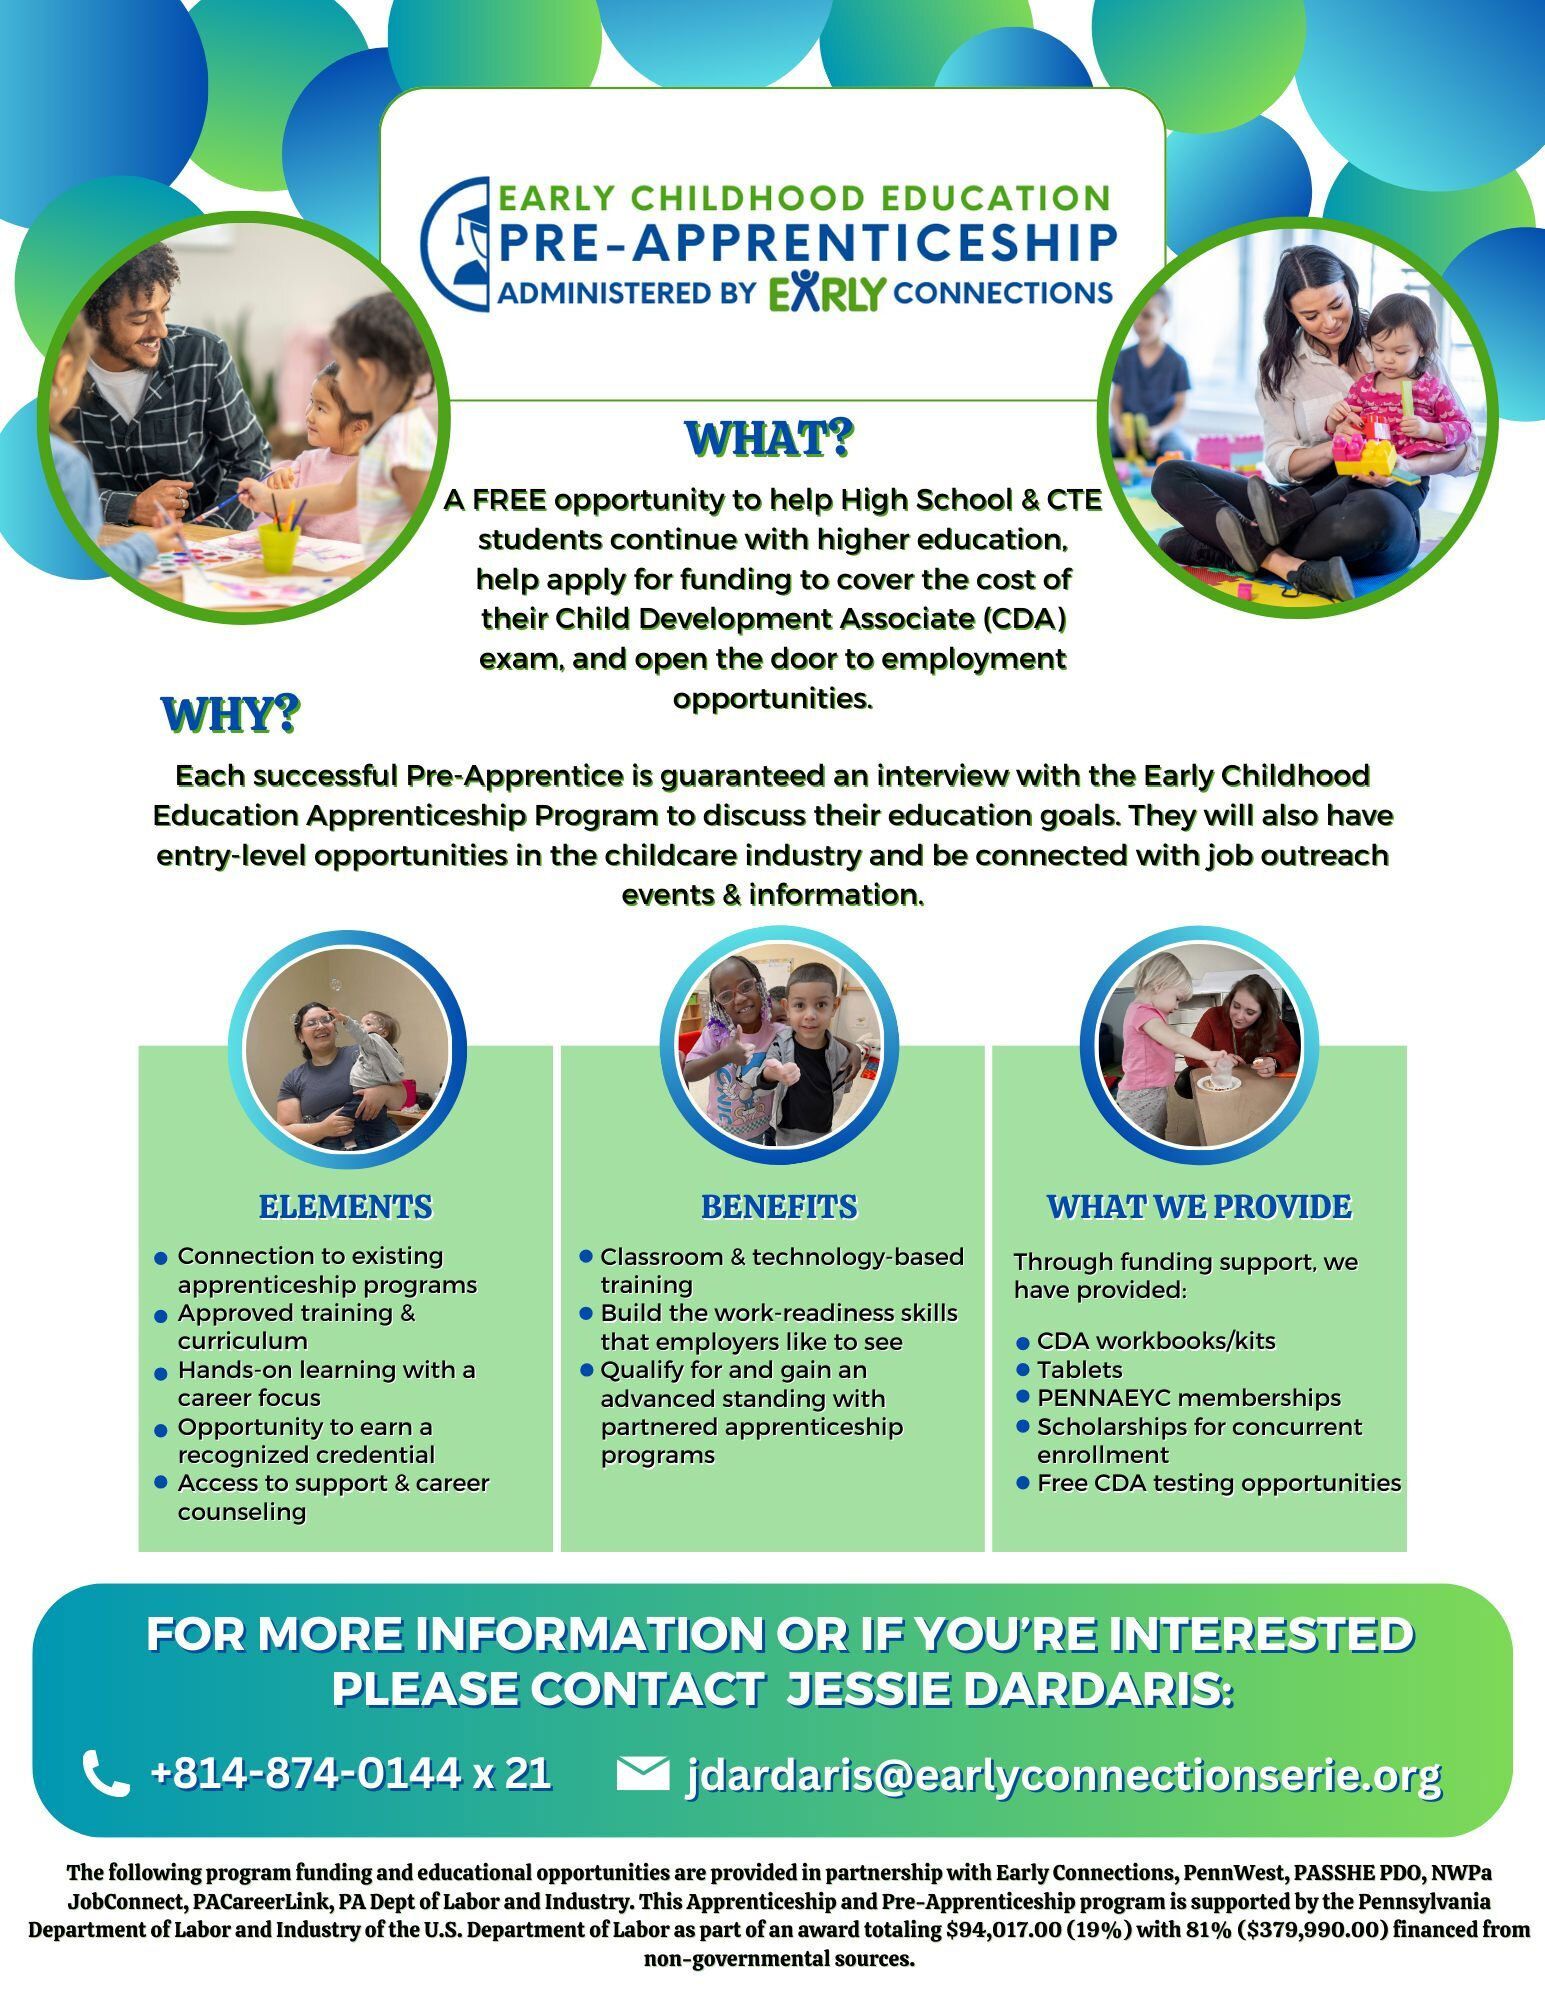 Check out the NW Region Early Childhood Education Pre-Apprenticeship Program